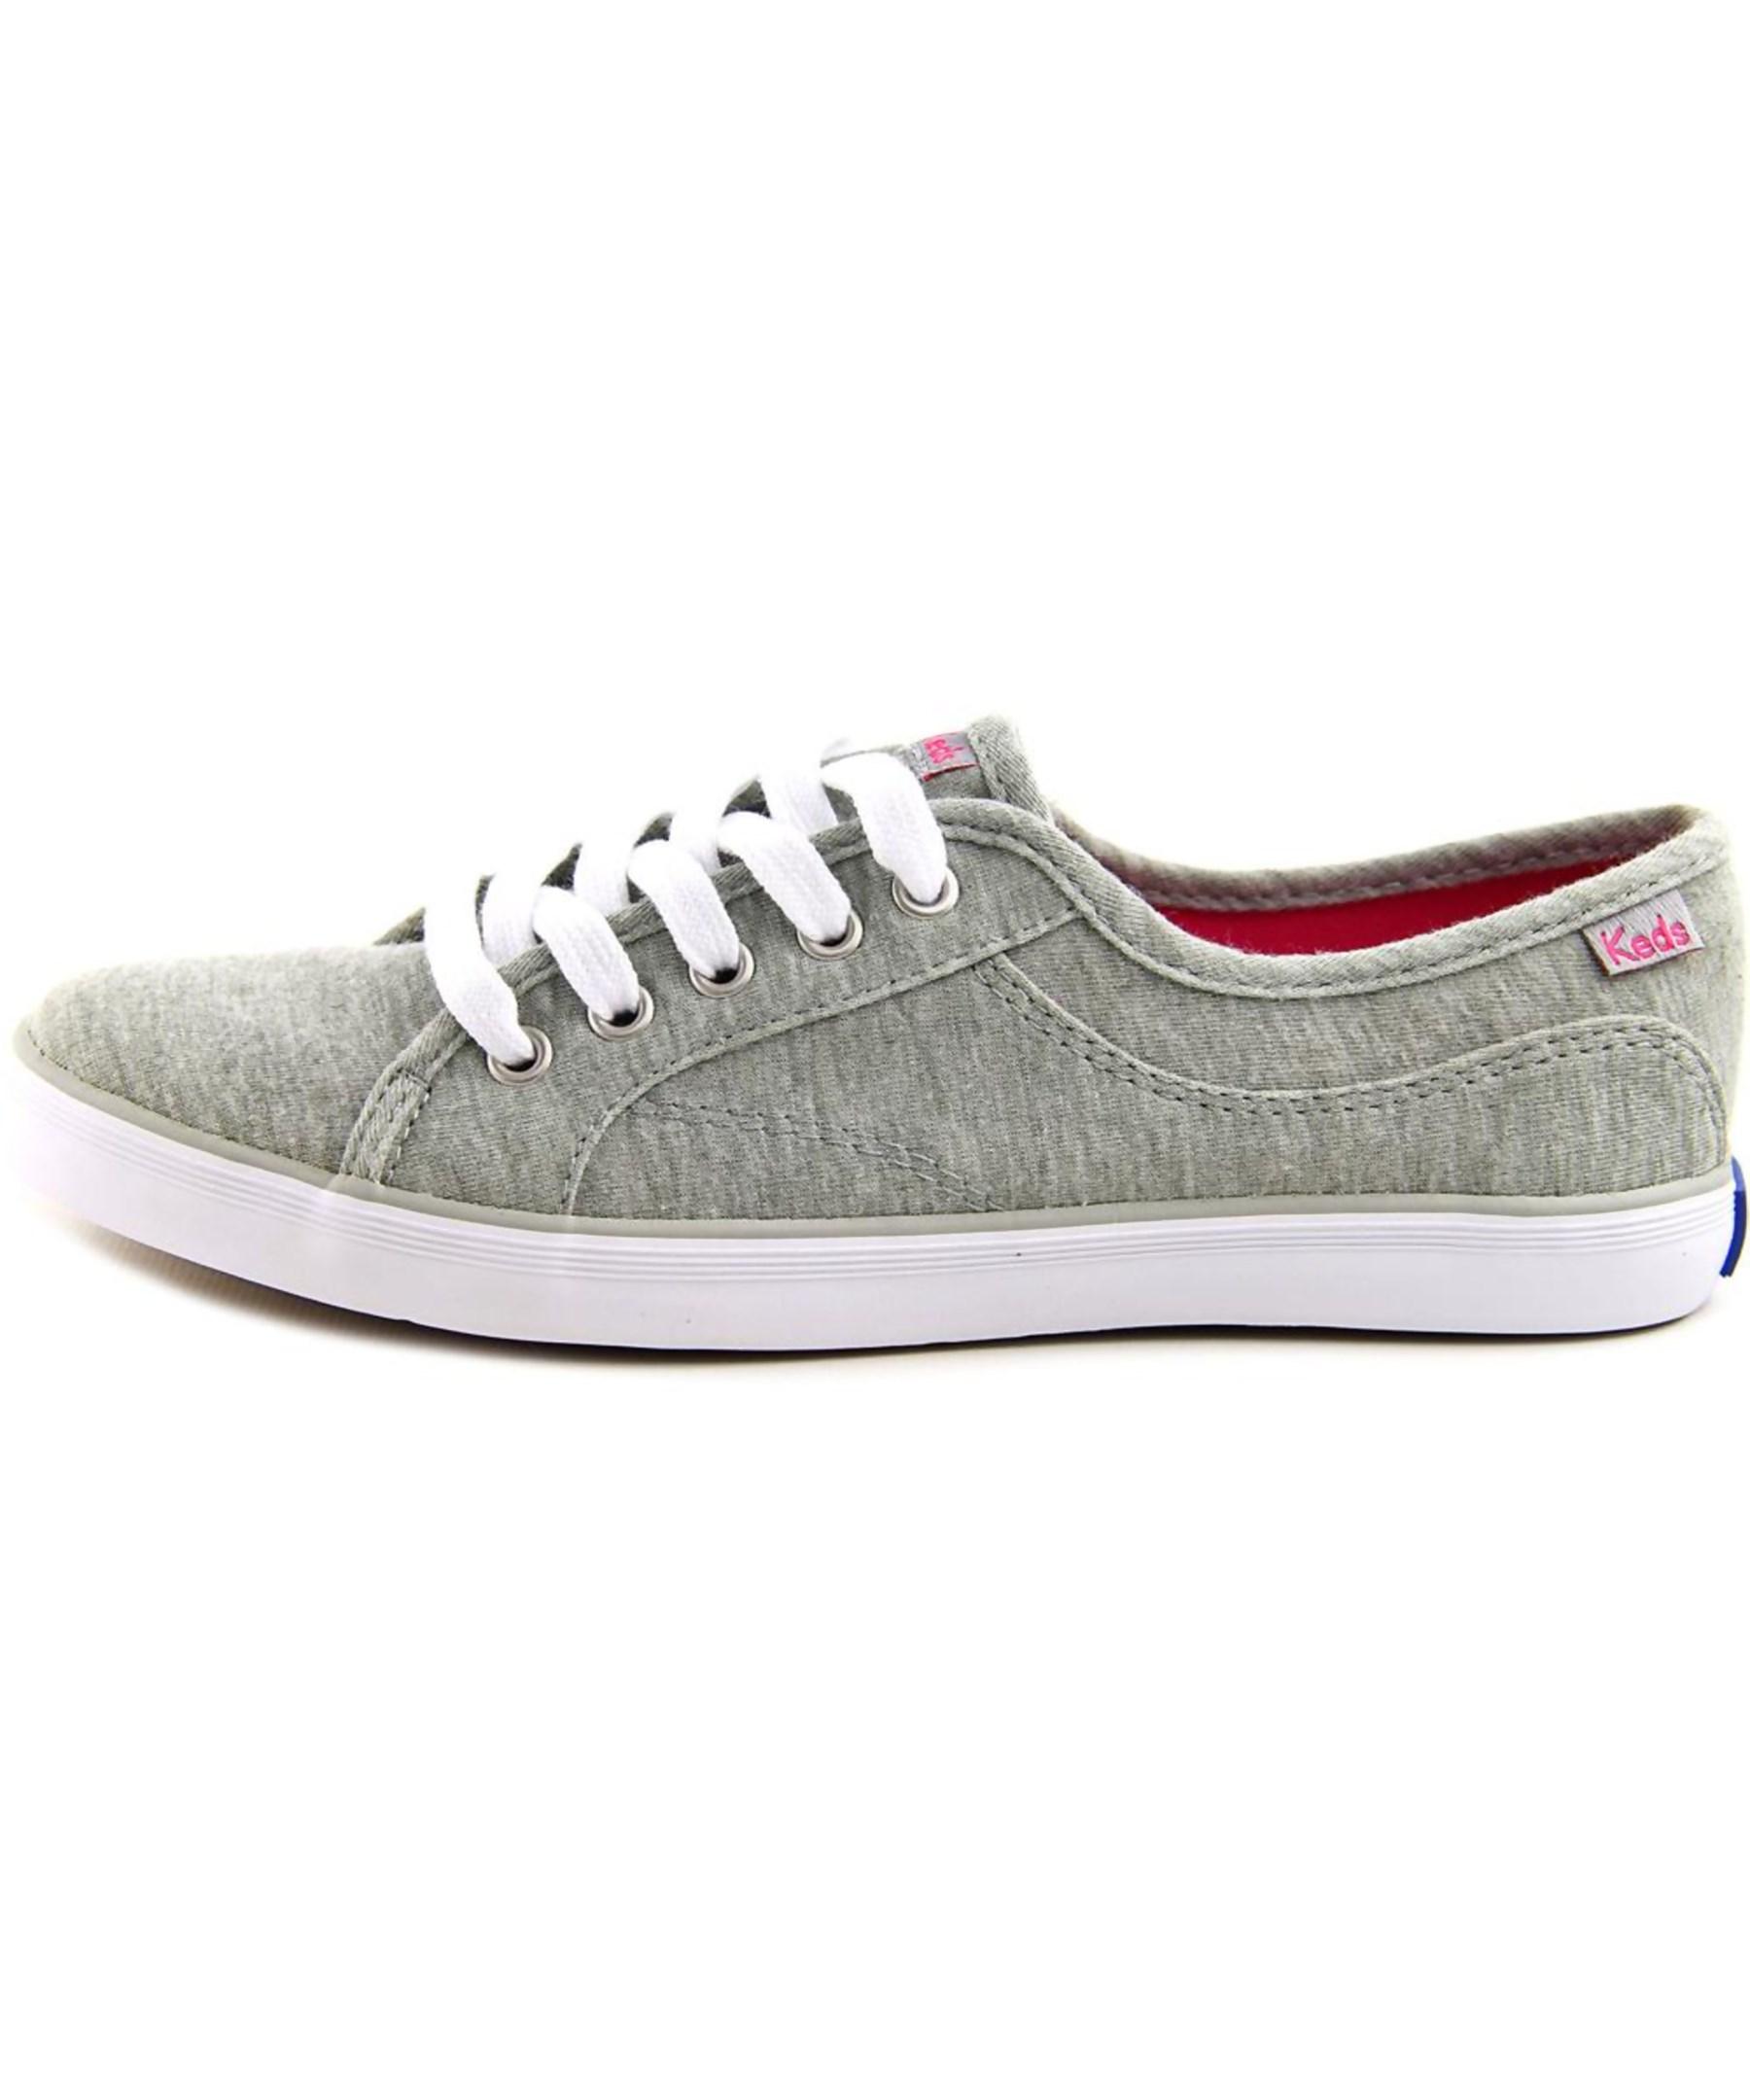 Keds Coursa Women Round Toe Canvas Sneakers in Gray | Lyst